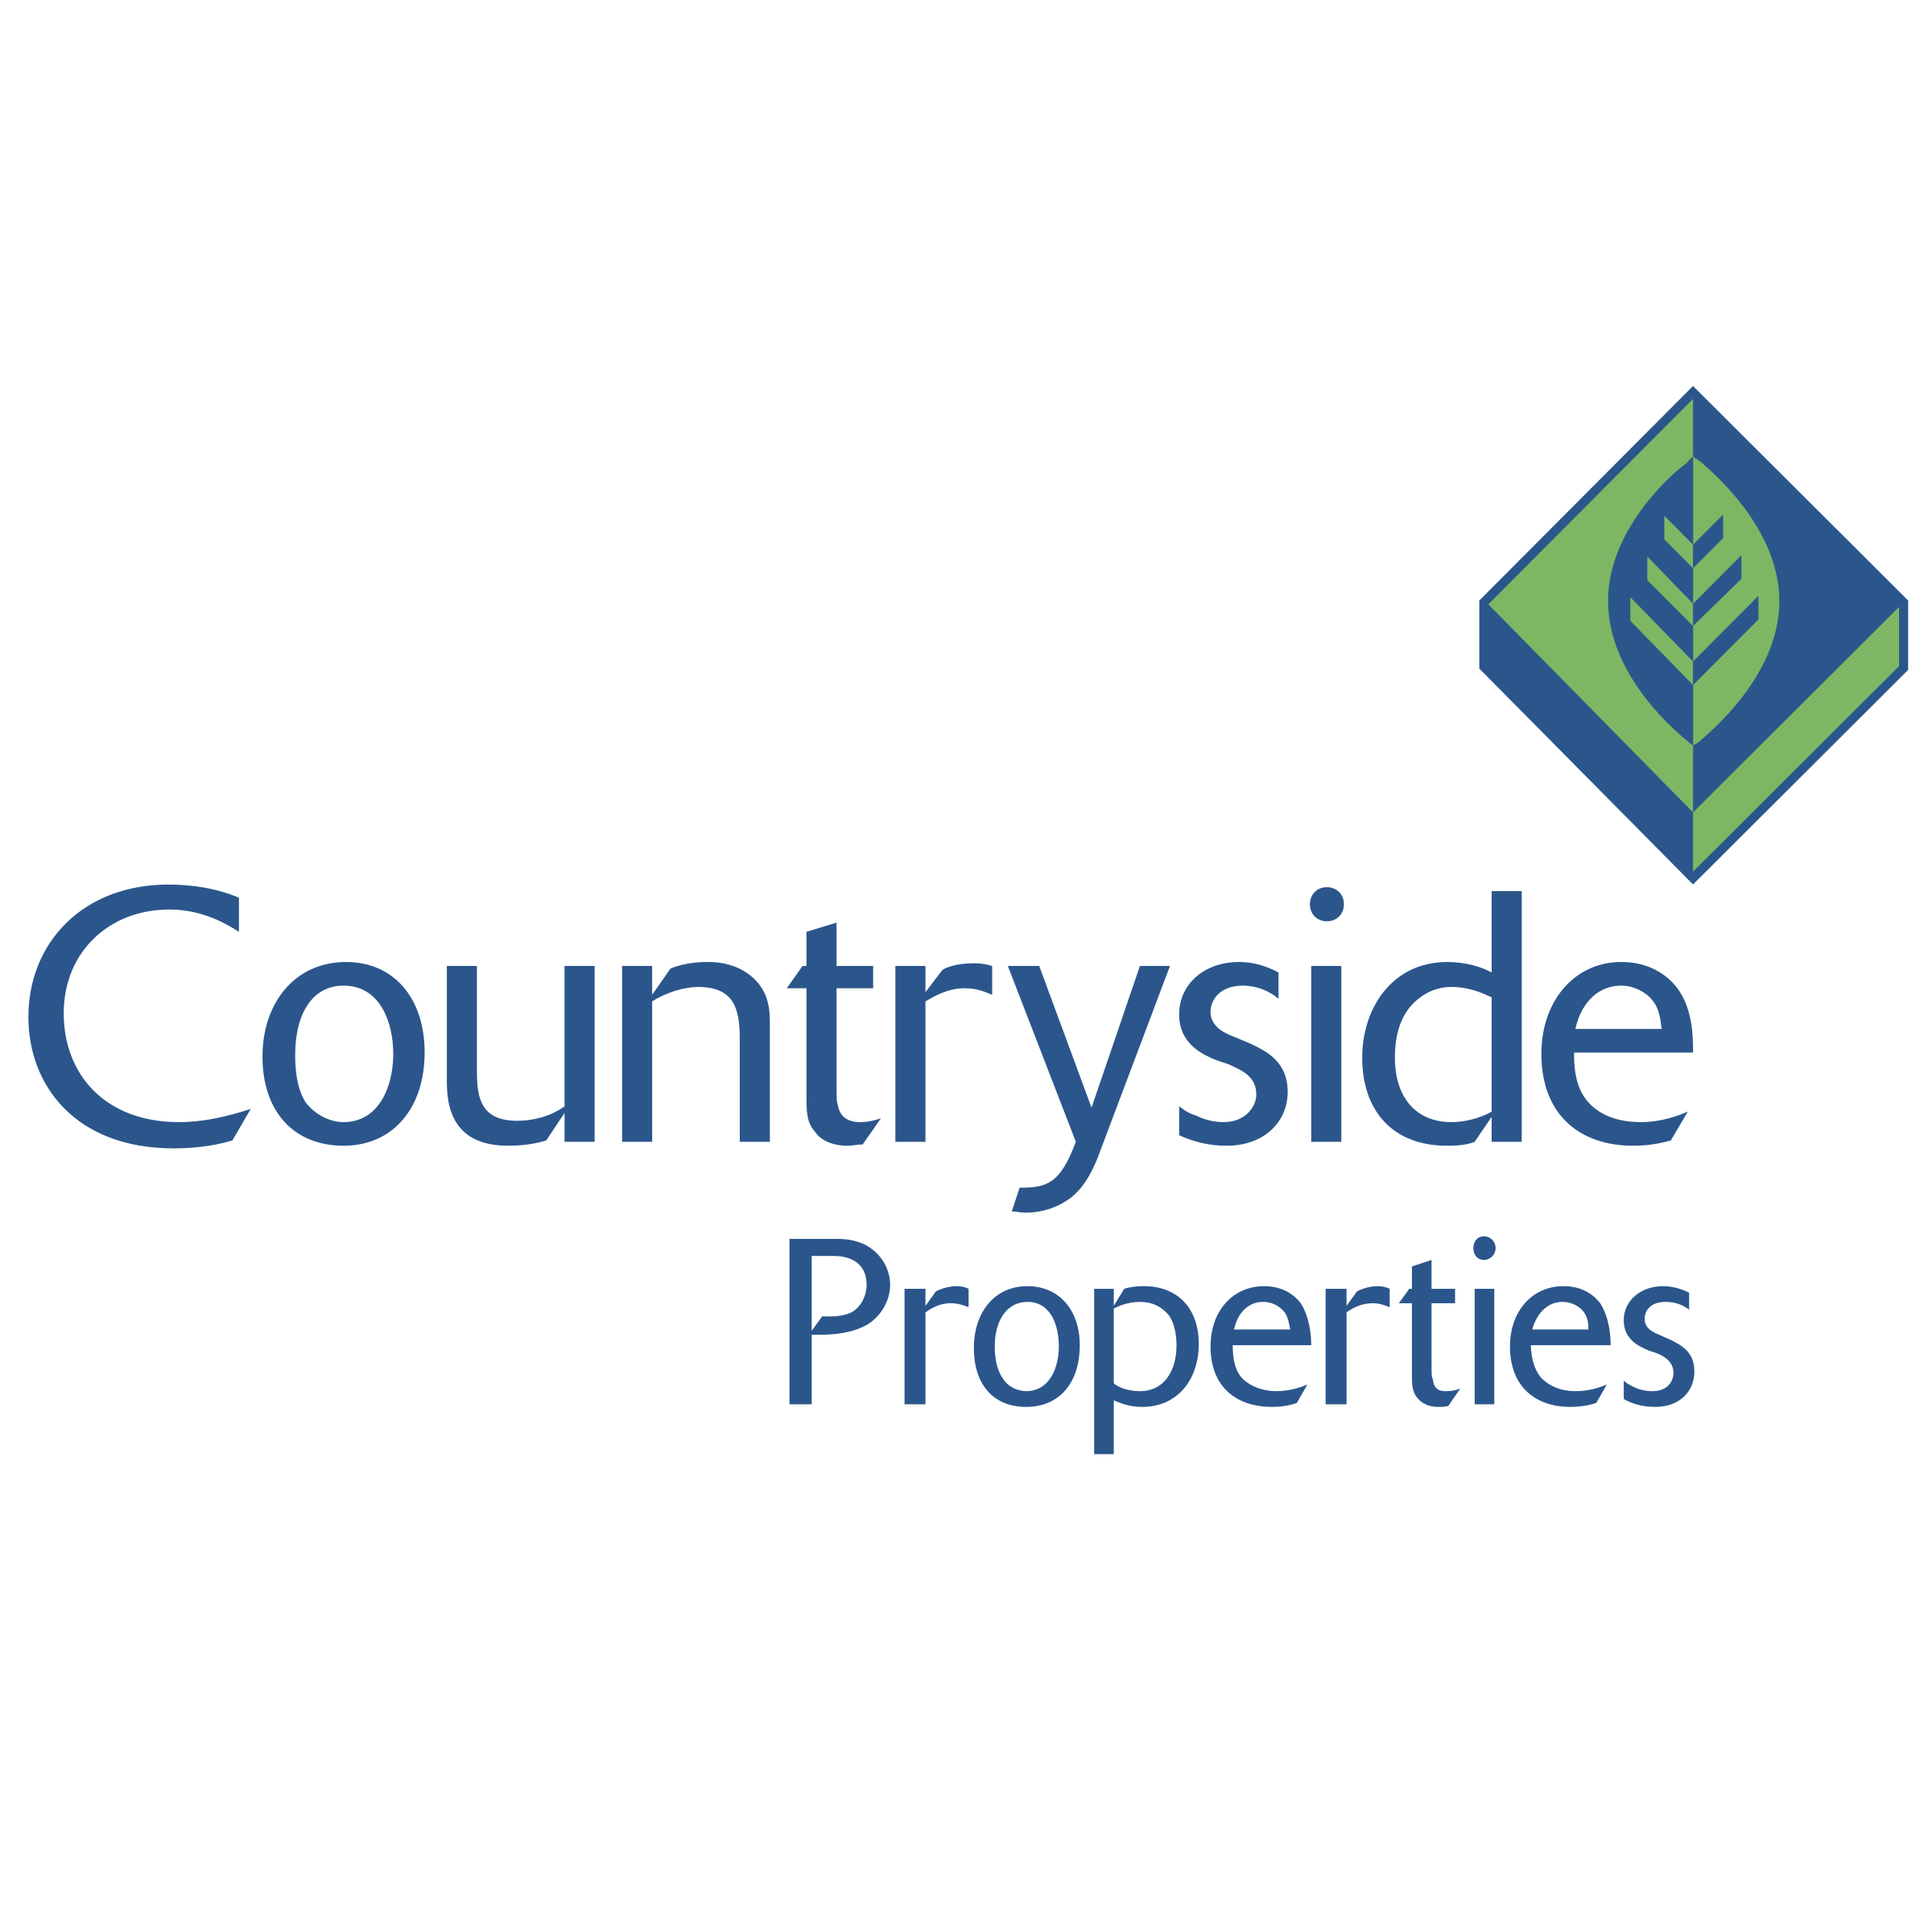 Countryside Logo - Countryside Properties Logo PNG Transparent & SVG Vector - Freebie ...